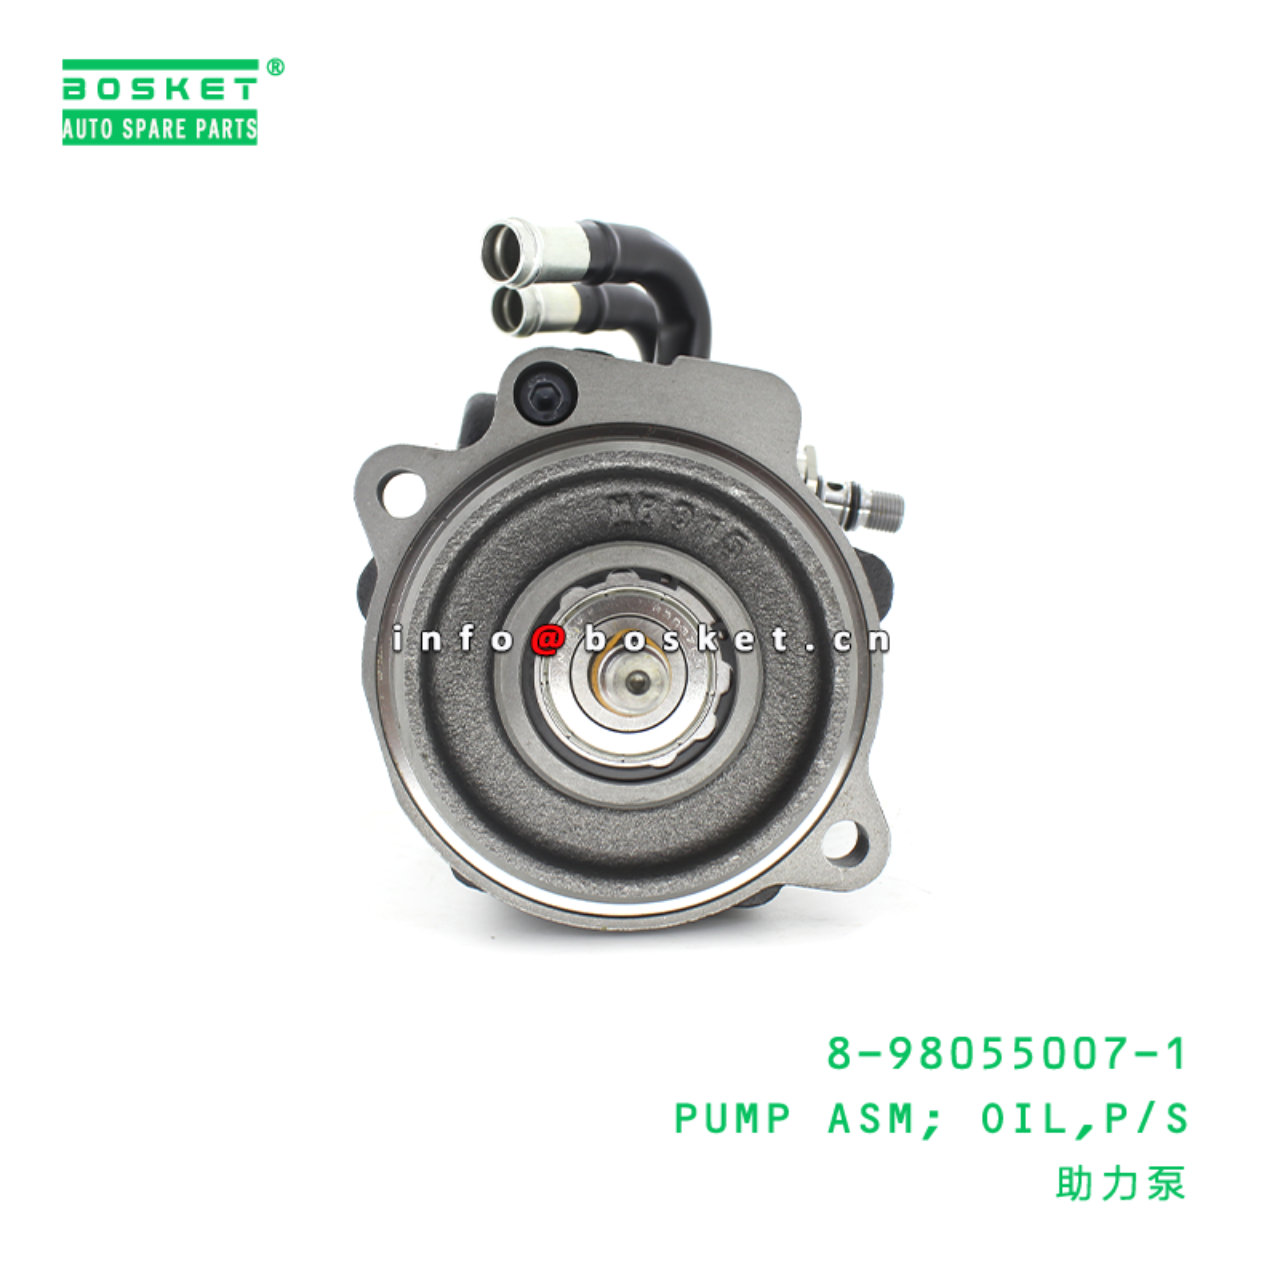 8-98055007-1 Power Steering Oil Pump Assembly Suitable for ISUZU NPR 8980550071